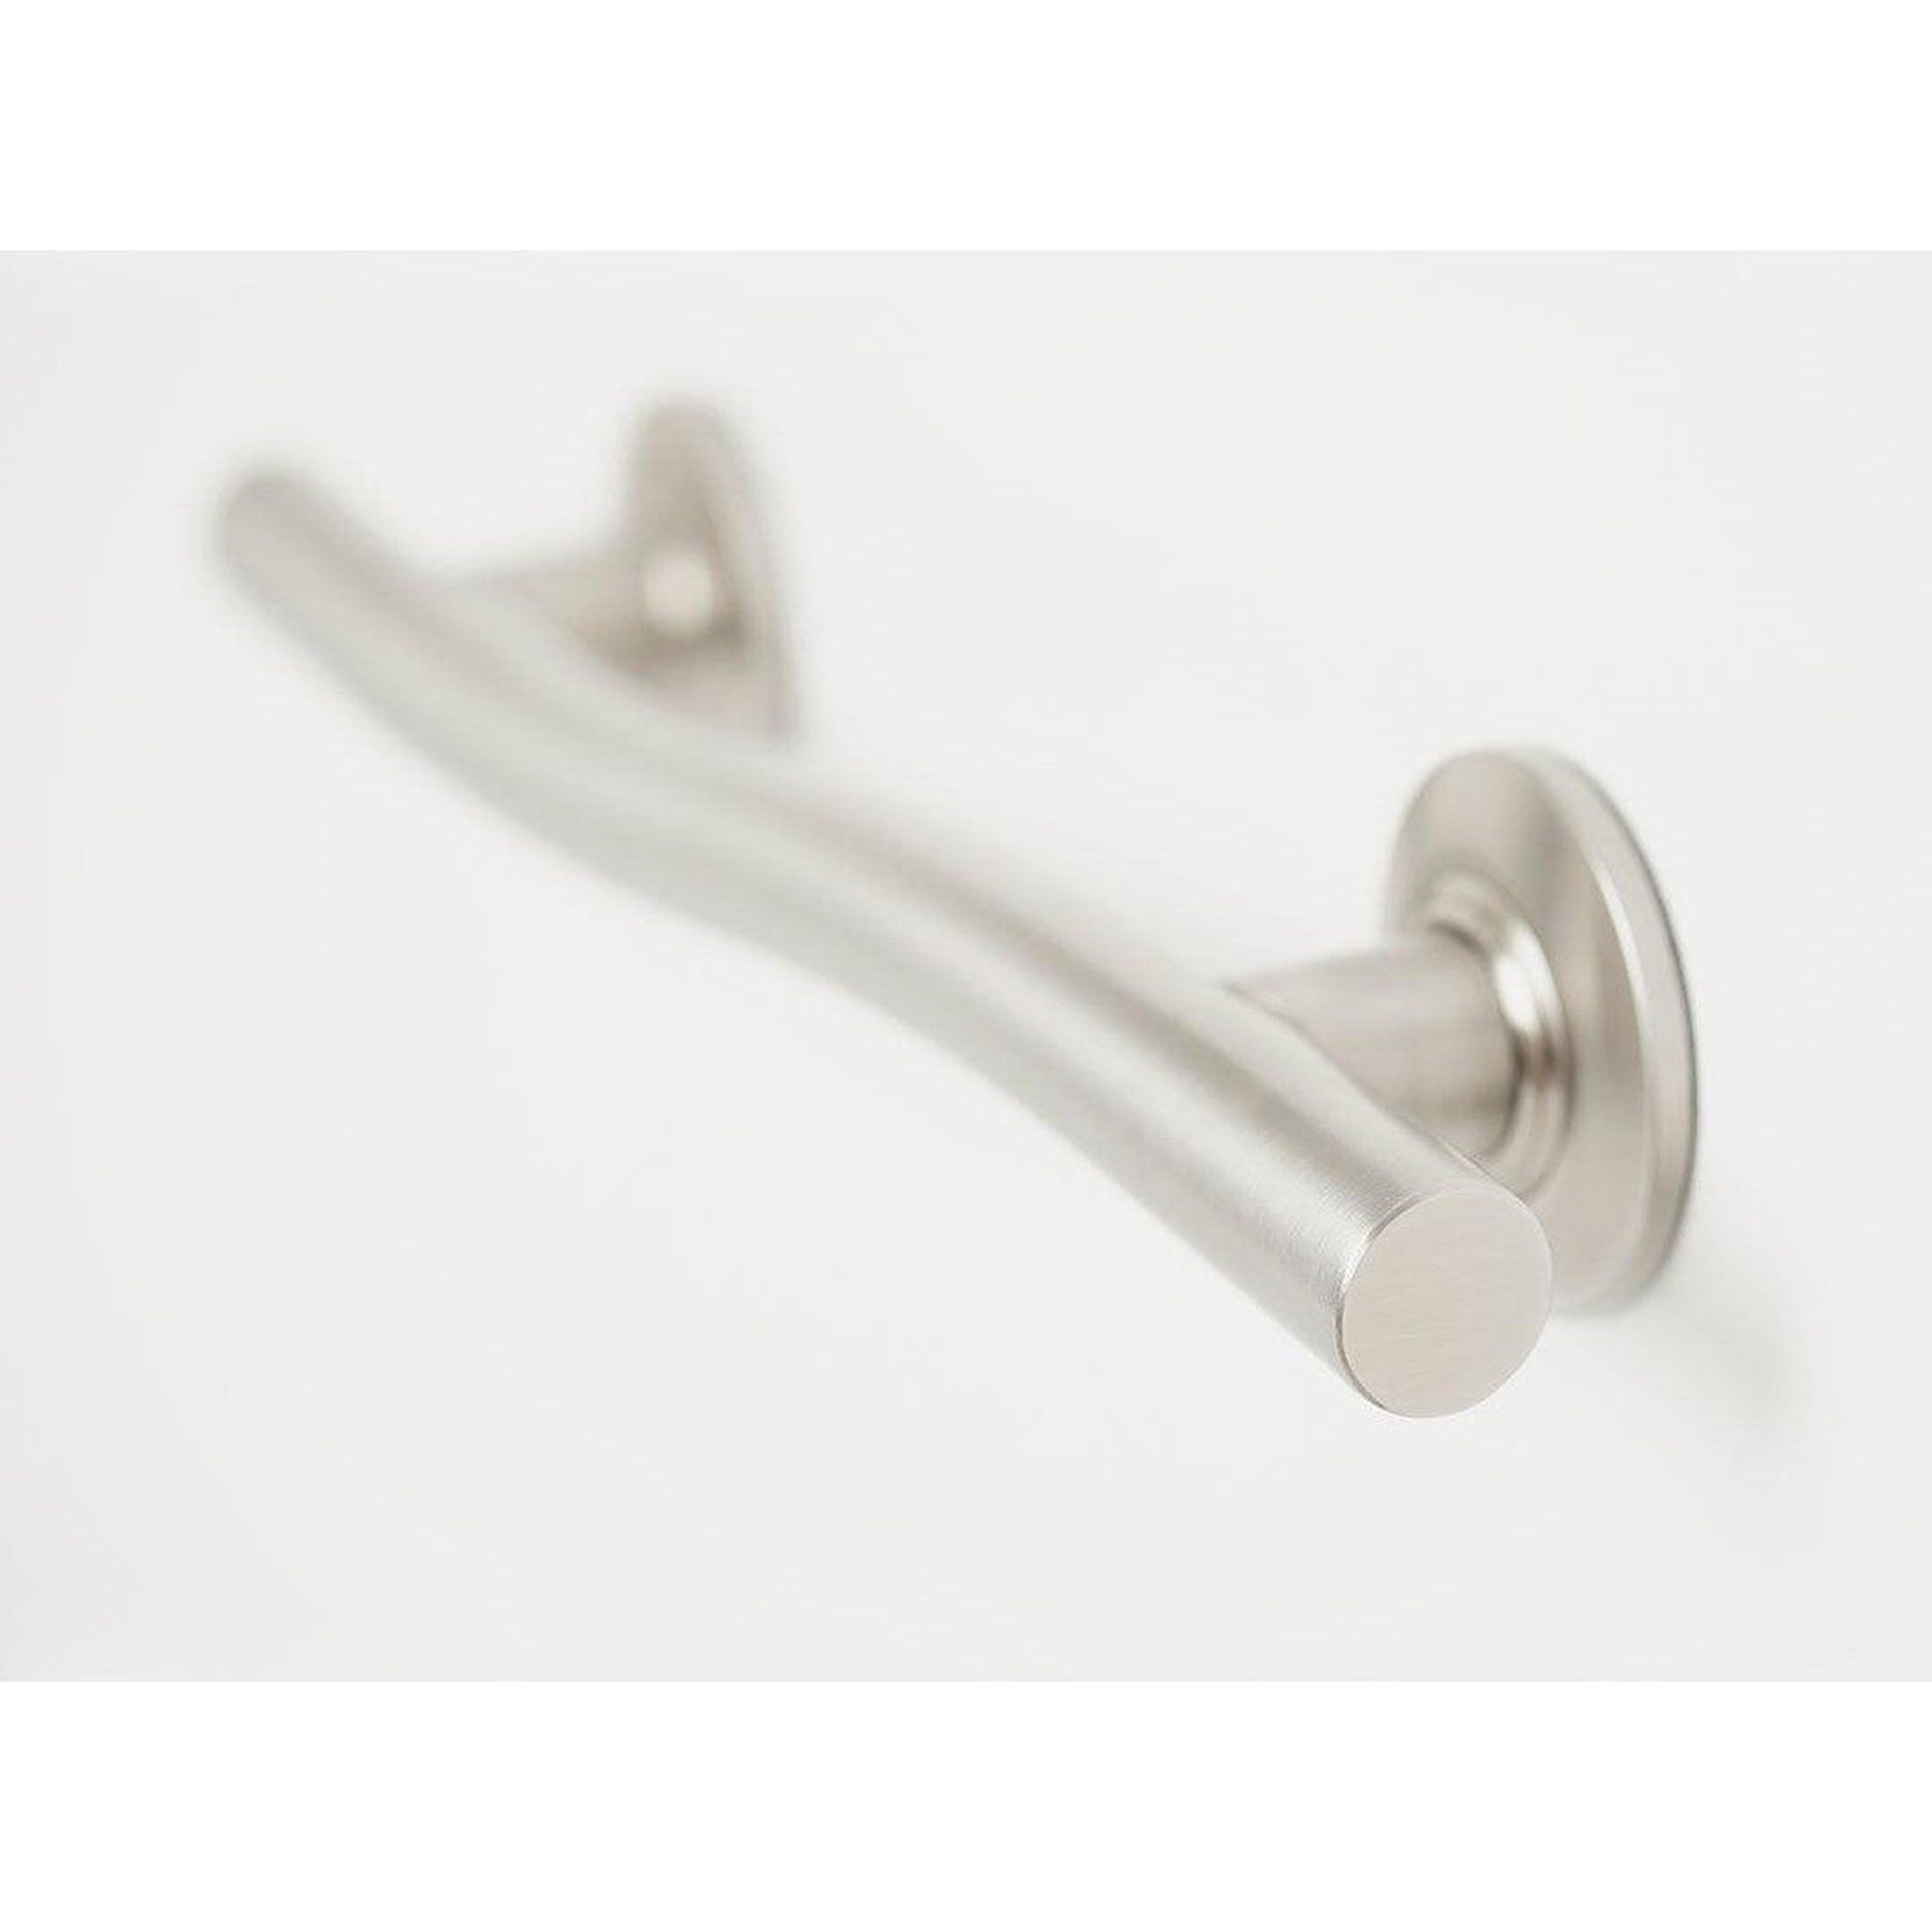 Seachrome Lifestyle & Wellness 36" Satin Stainless Steel 1.25 Diameter Concealed Flange Wave Grab Bar